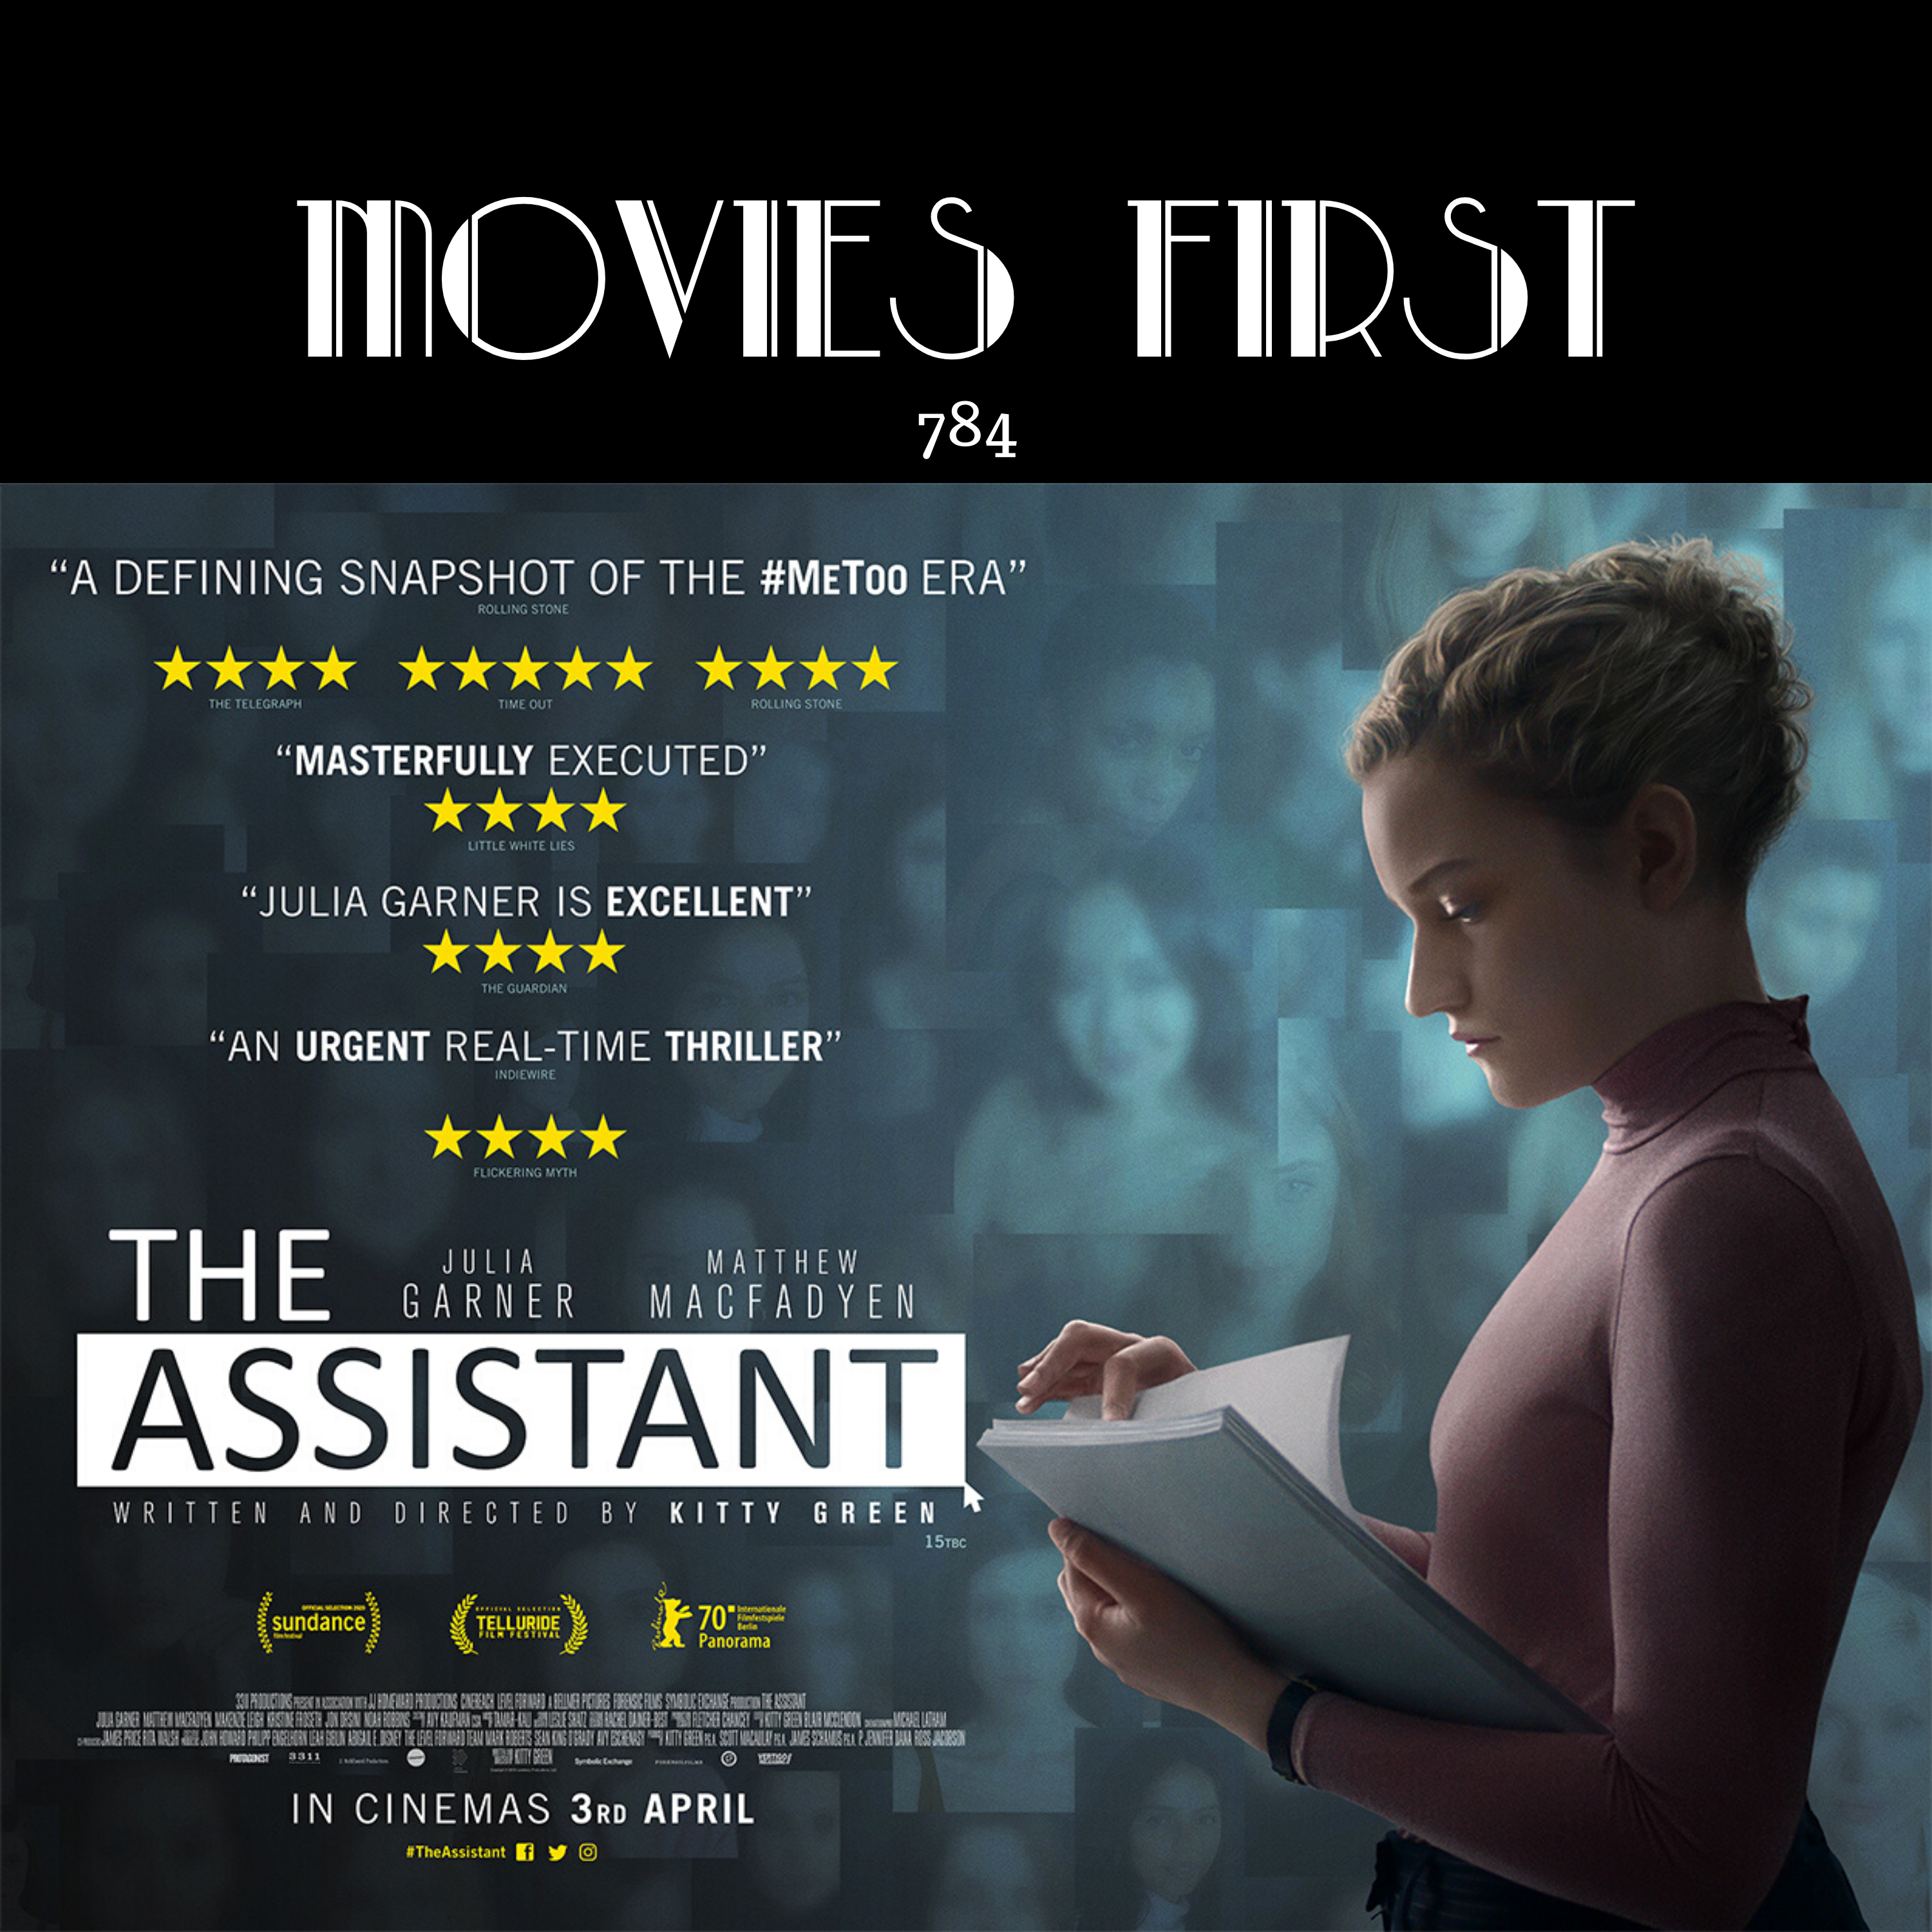 The Assistant (Drama) (the @MoviesFirst review)